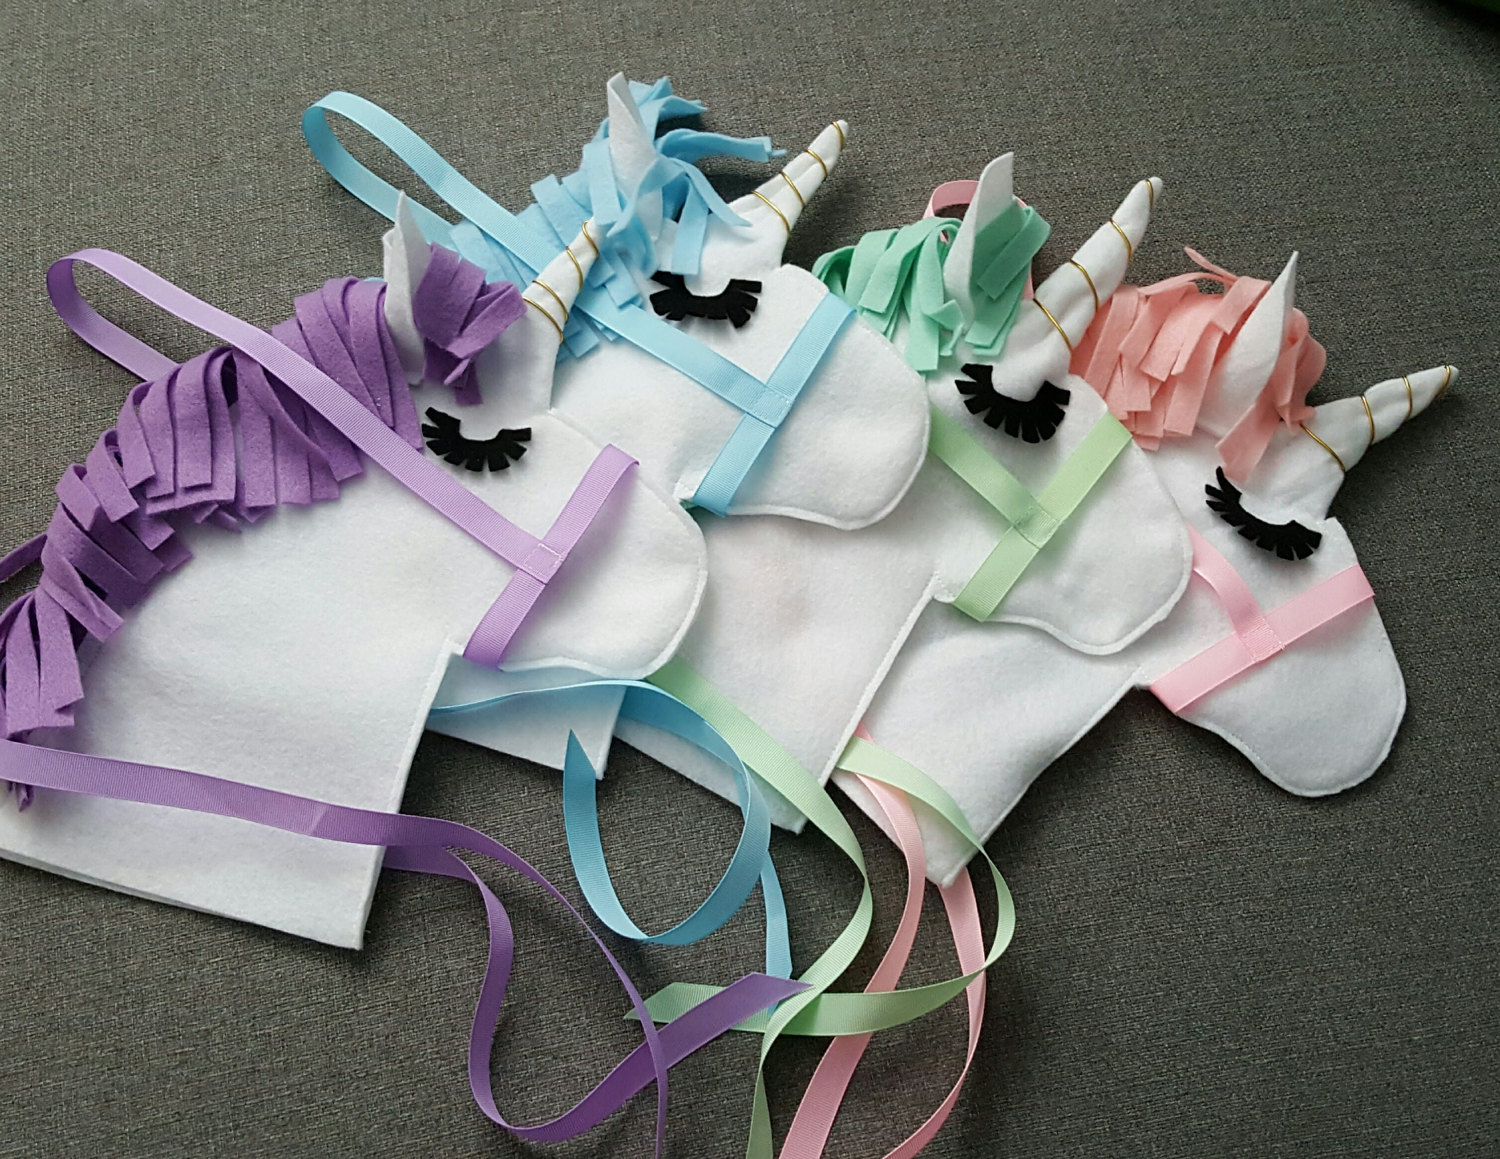  Highlights for Children Ribbons and Unicorn Craft Kit